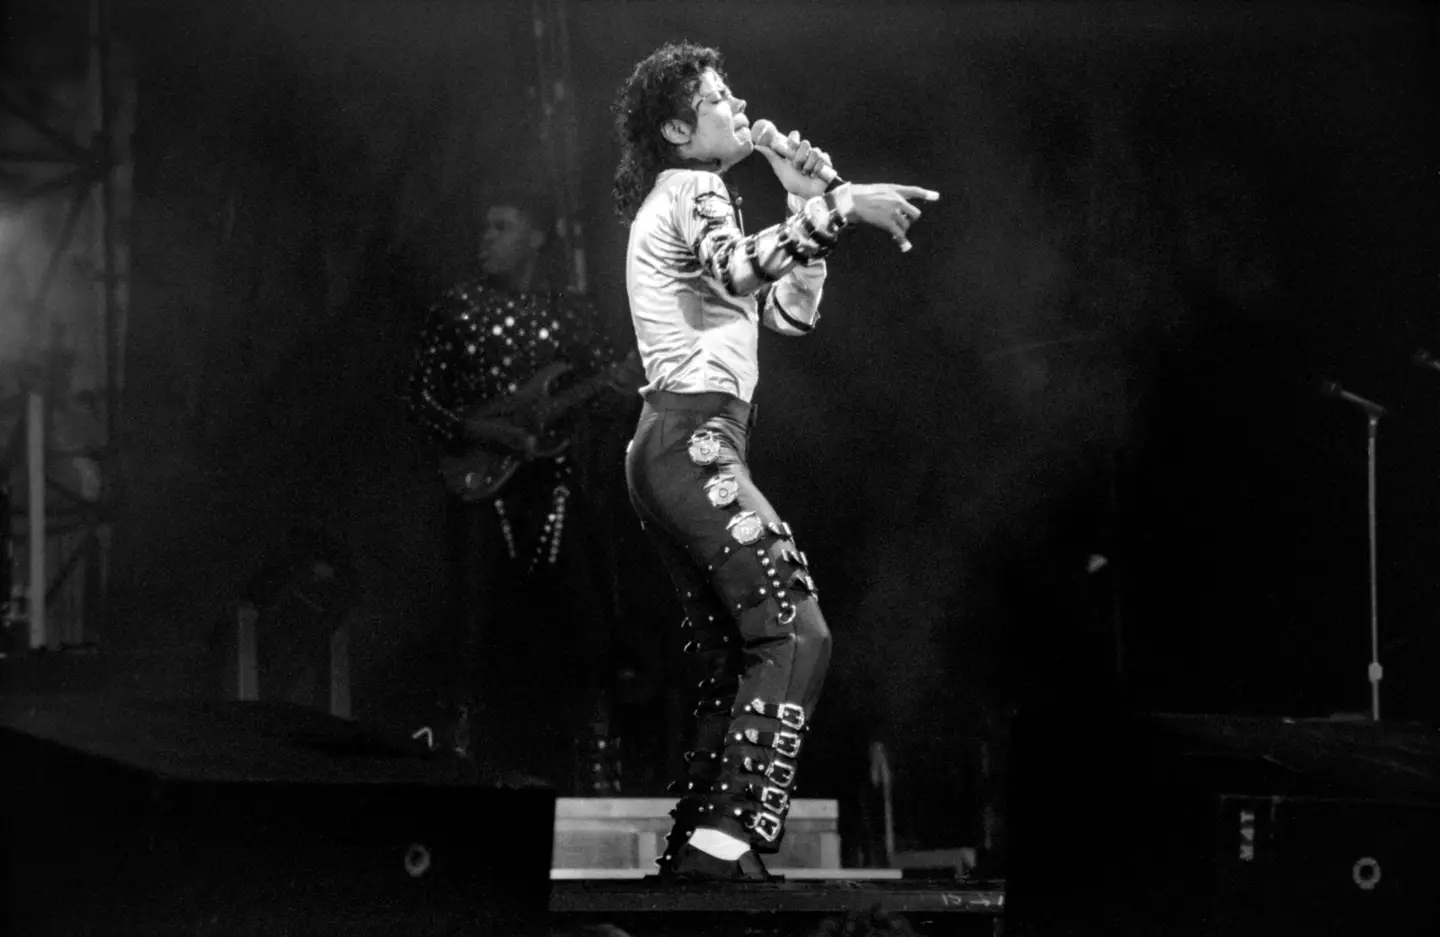 Sundberg was in possession of unreleased material of Michael Jackson during some of his studio sessions.